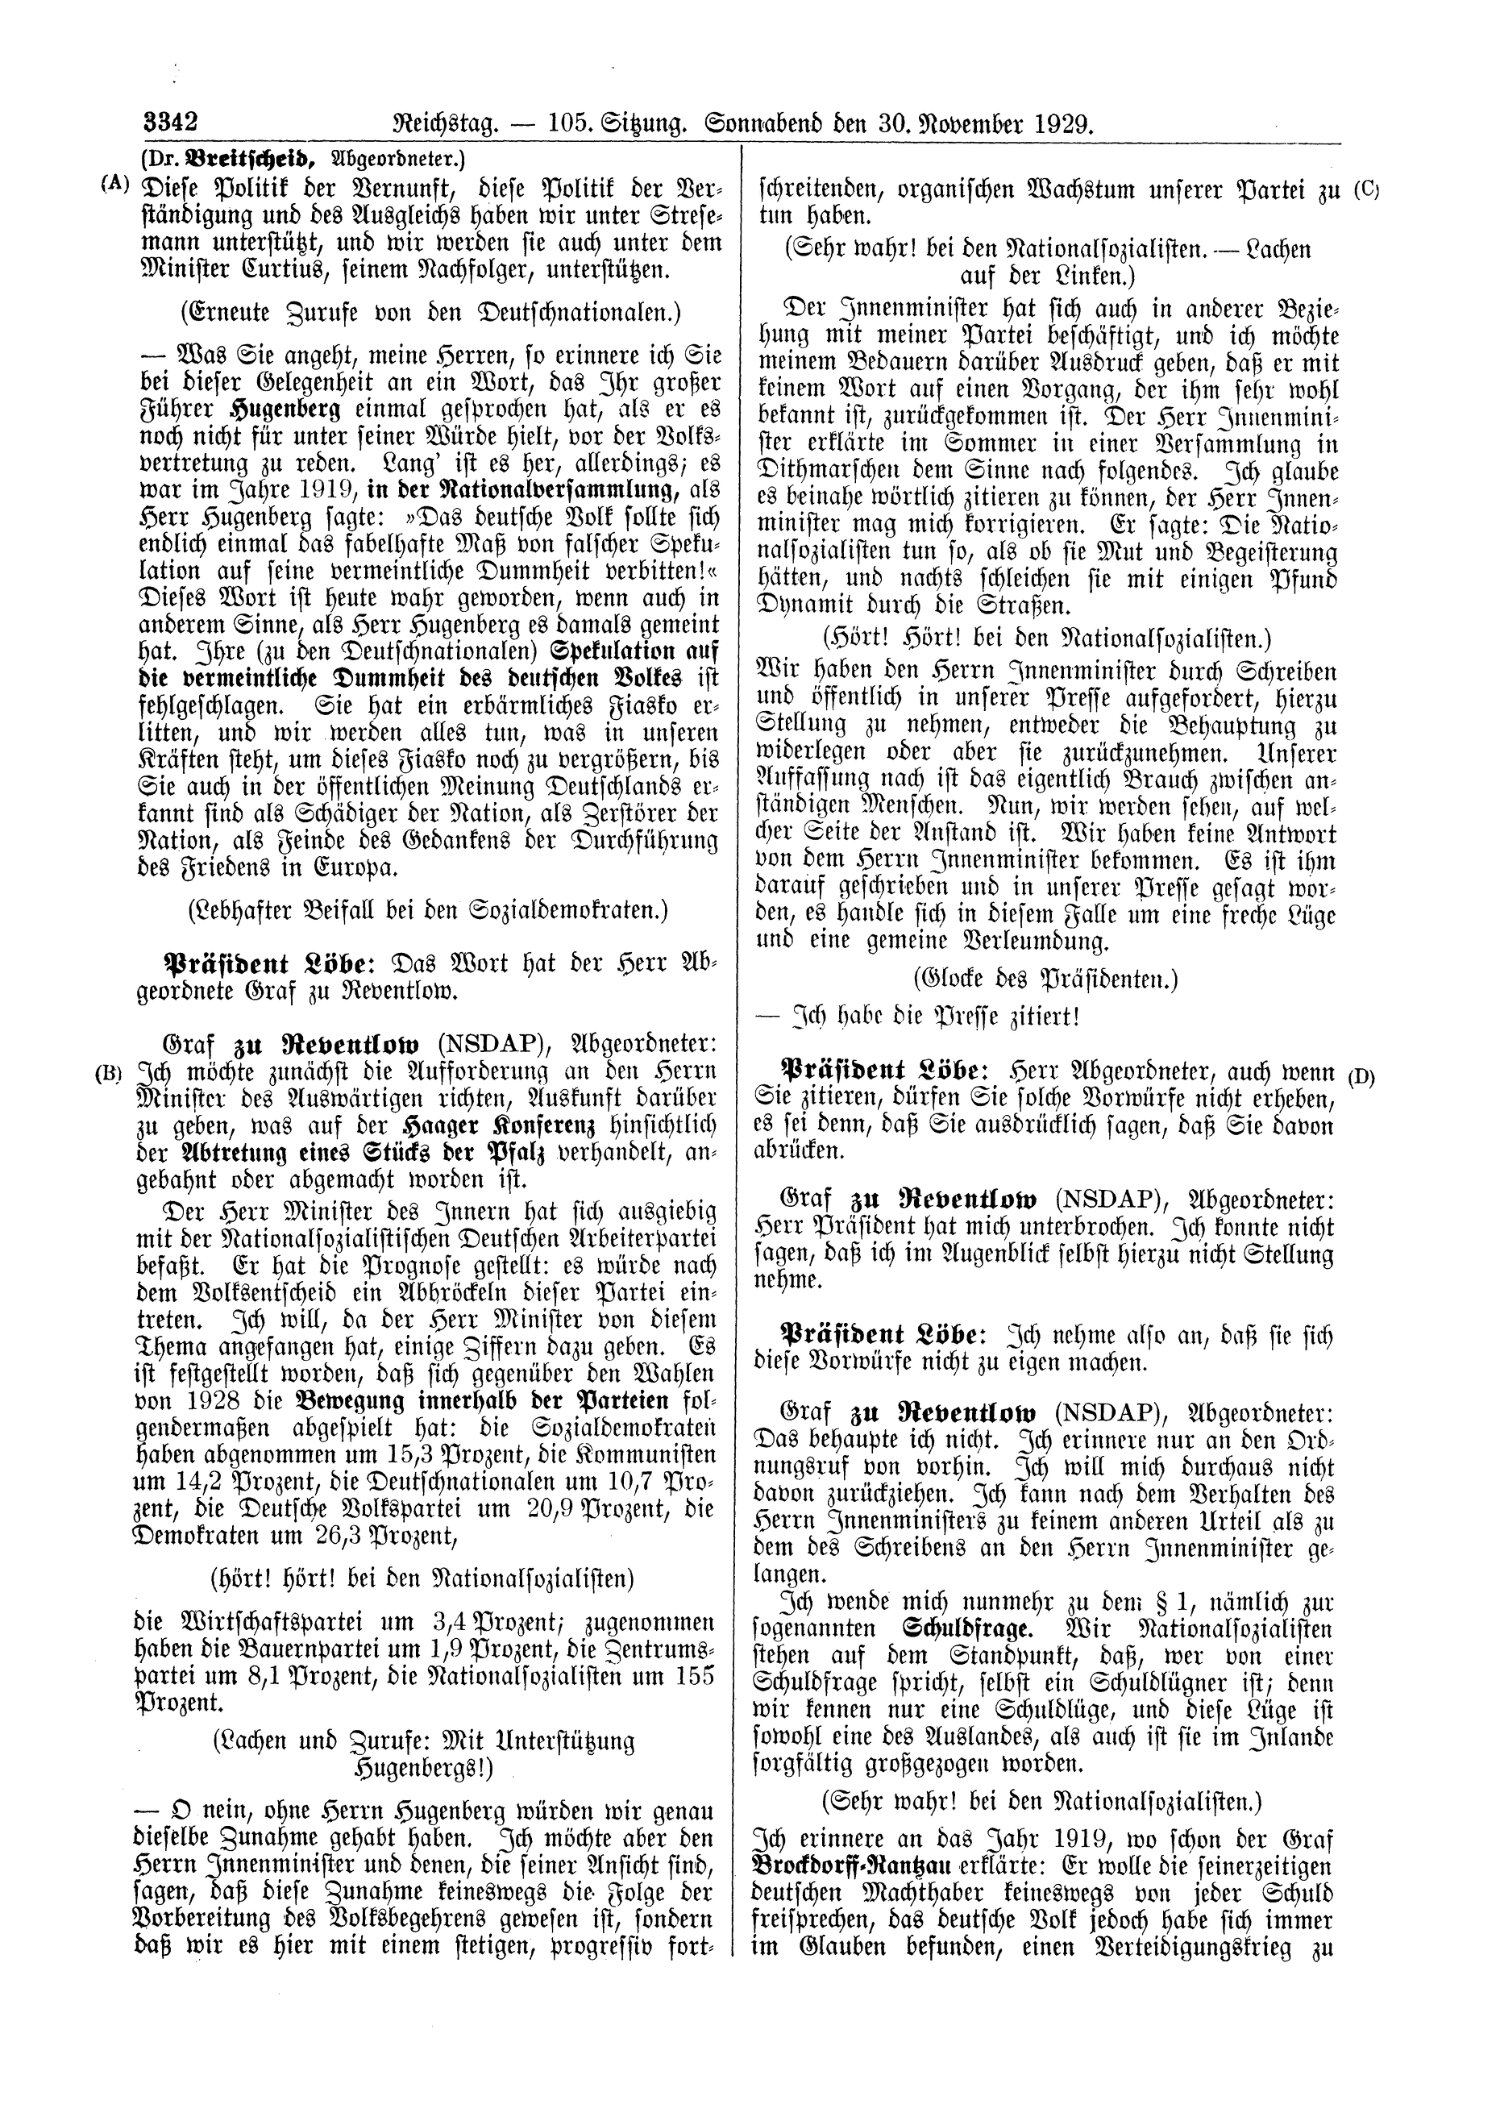 Scan of page 3342